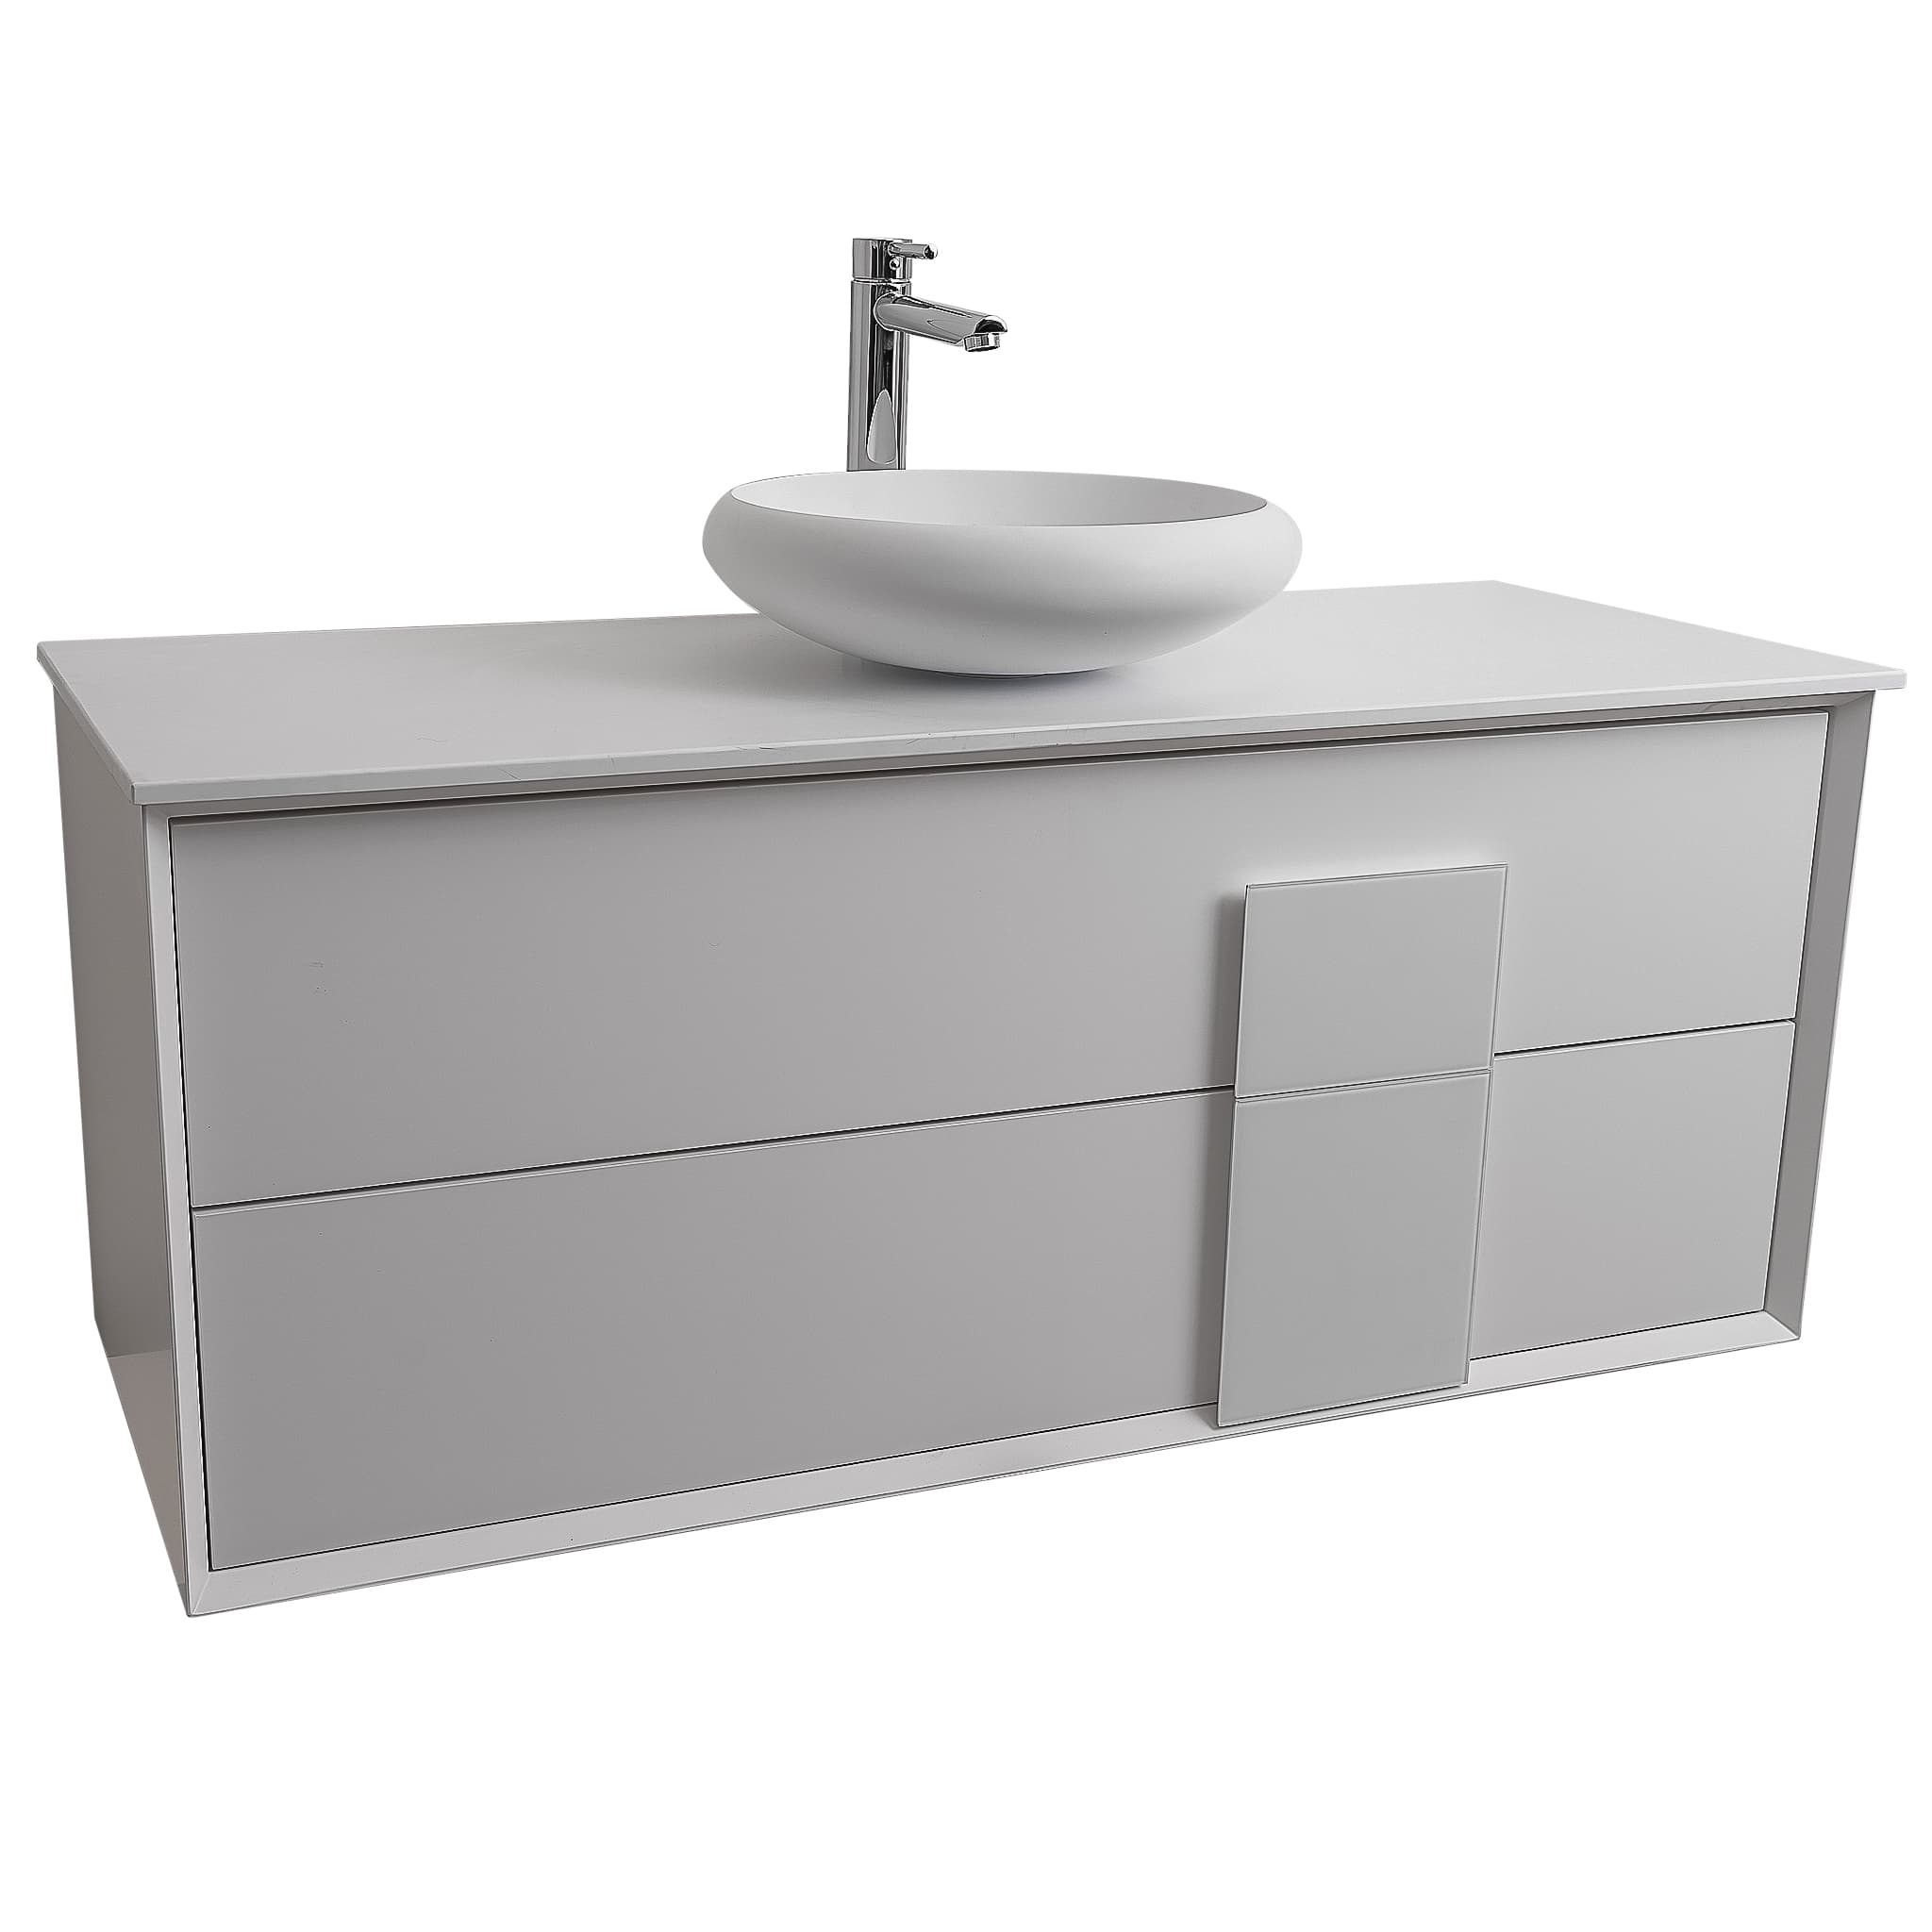 Piazza 47.5 Matte White With White Handle Cabinet, Solid Surface Flat White Counter and Round Solid Surface White Basin 1153, Wall Mounted Modern Vanity Set